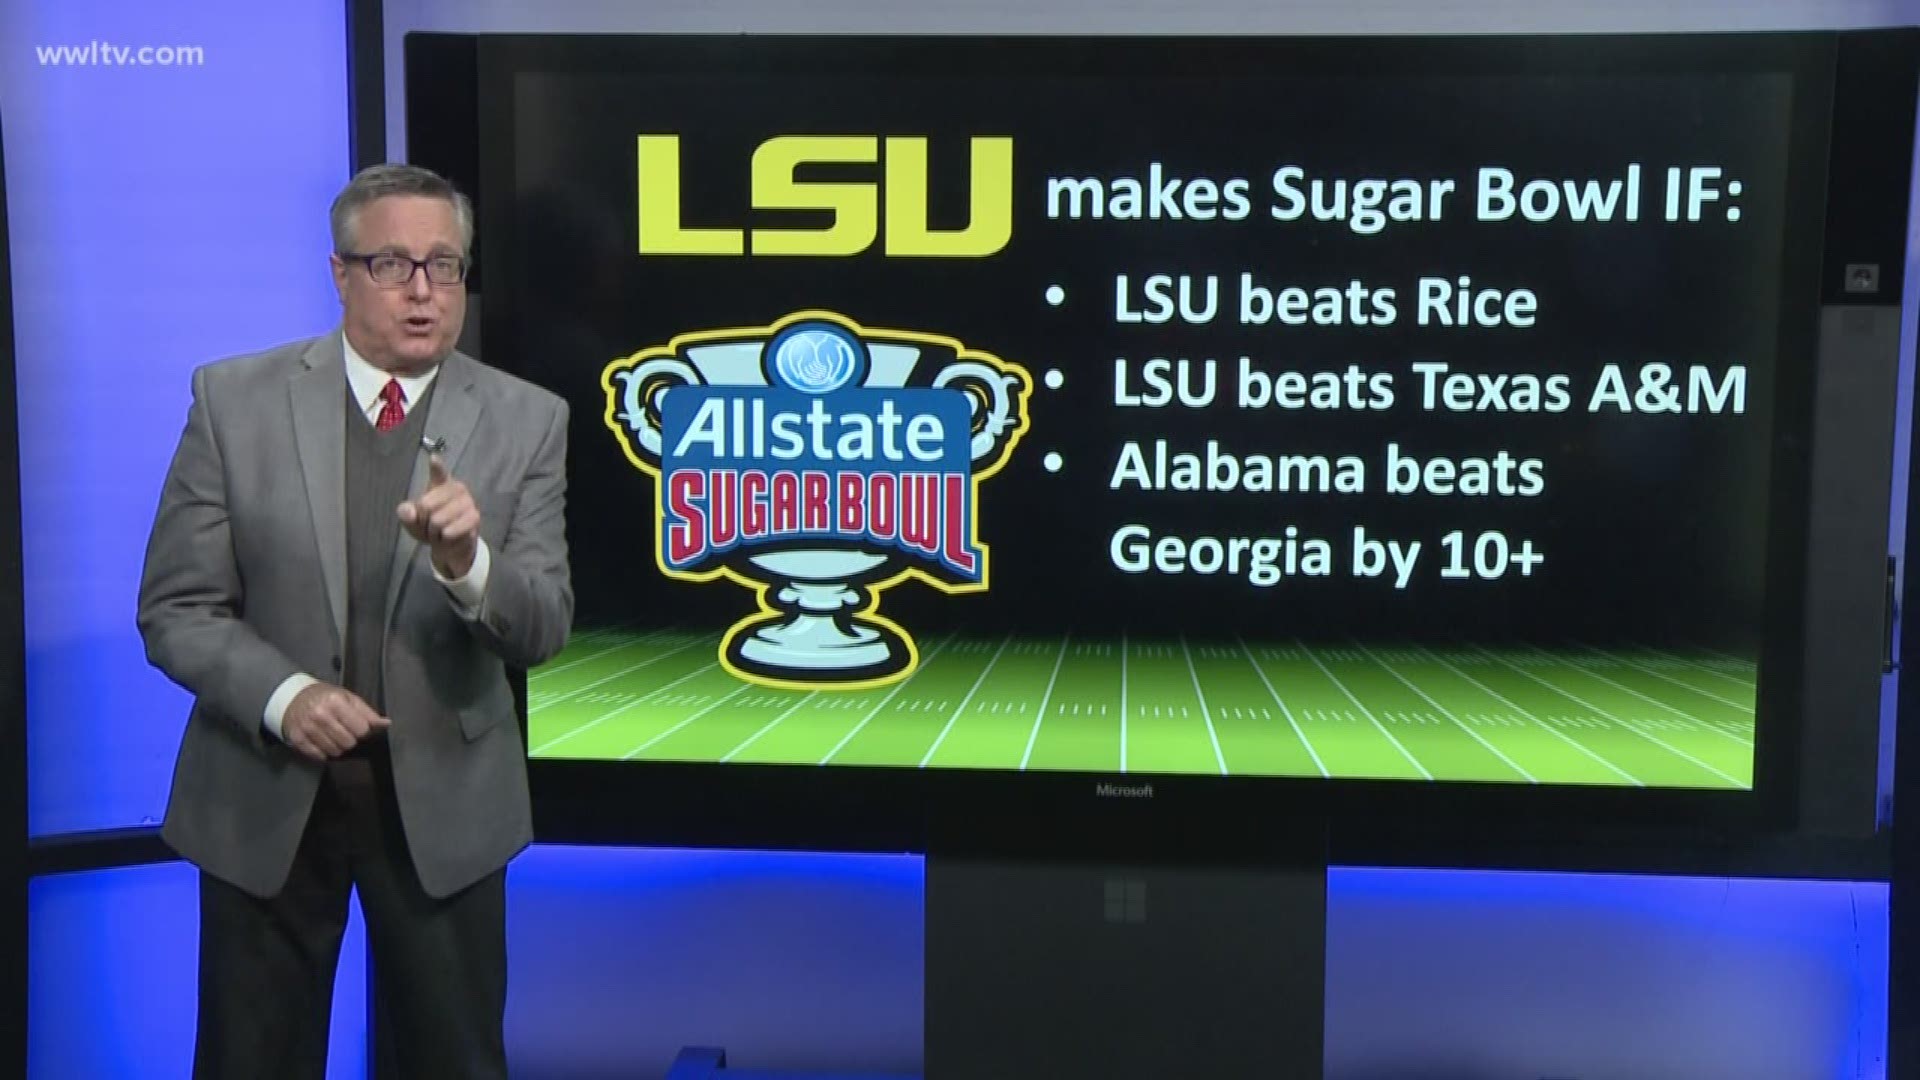 According to Sports Director Doug Mouton, LSU will make the Sugar Bowl if they beat Rice, Texas A&M and Alabama beats Georgia by more than 10 points.